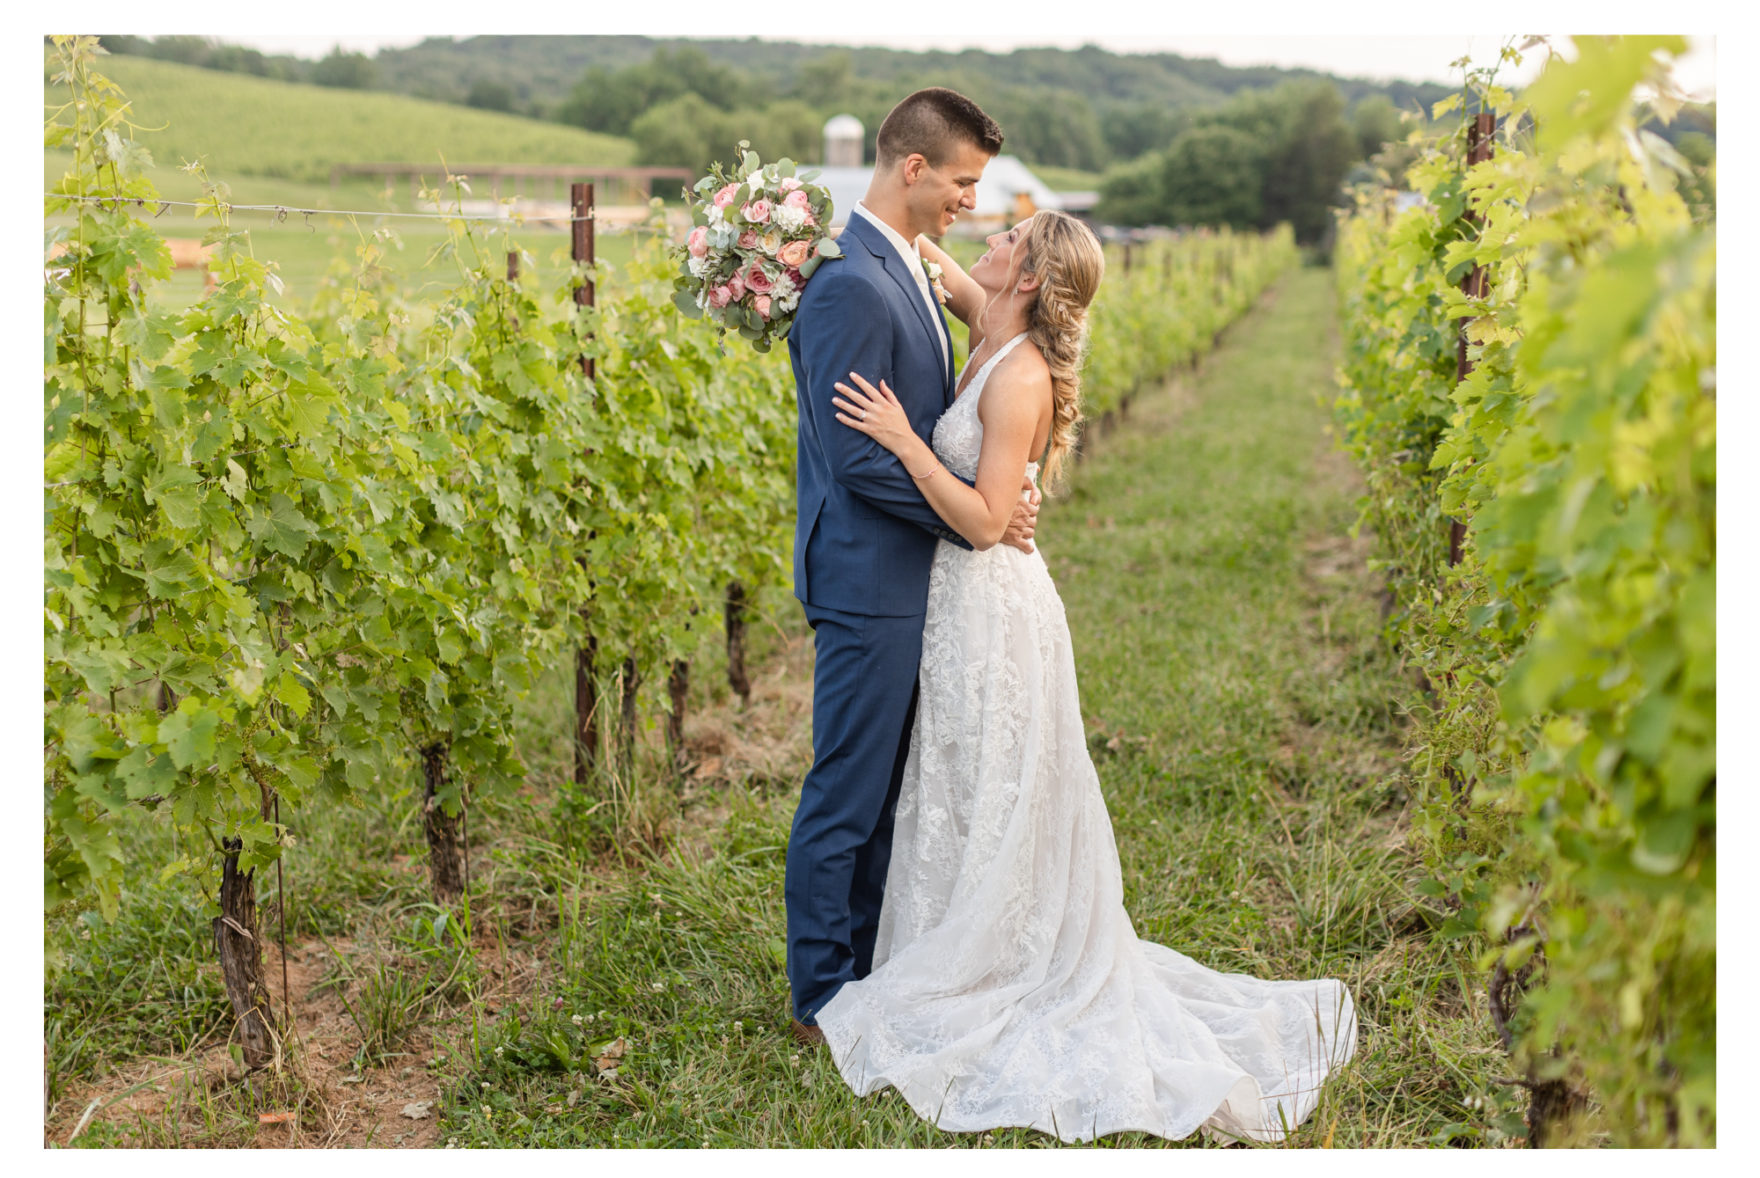 Summer wedding at Black Ankle Winery. Junior best men, gymnast dancing, mauve and navy wedding colors, double rainbow at wedding, sparkler send off